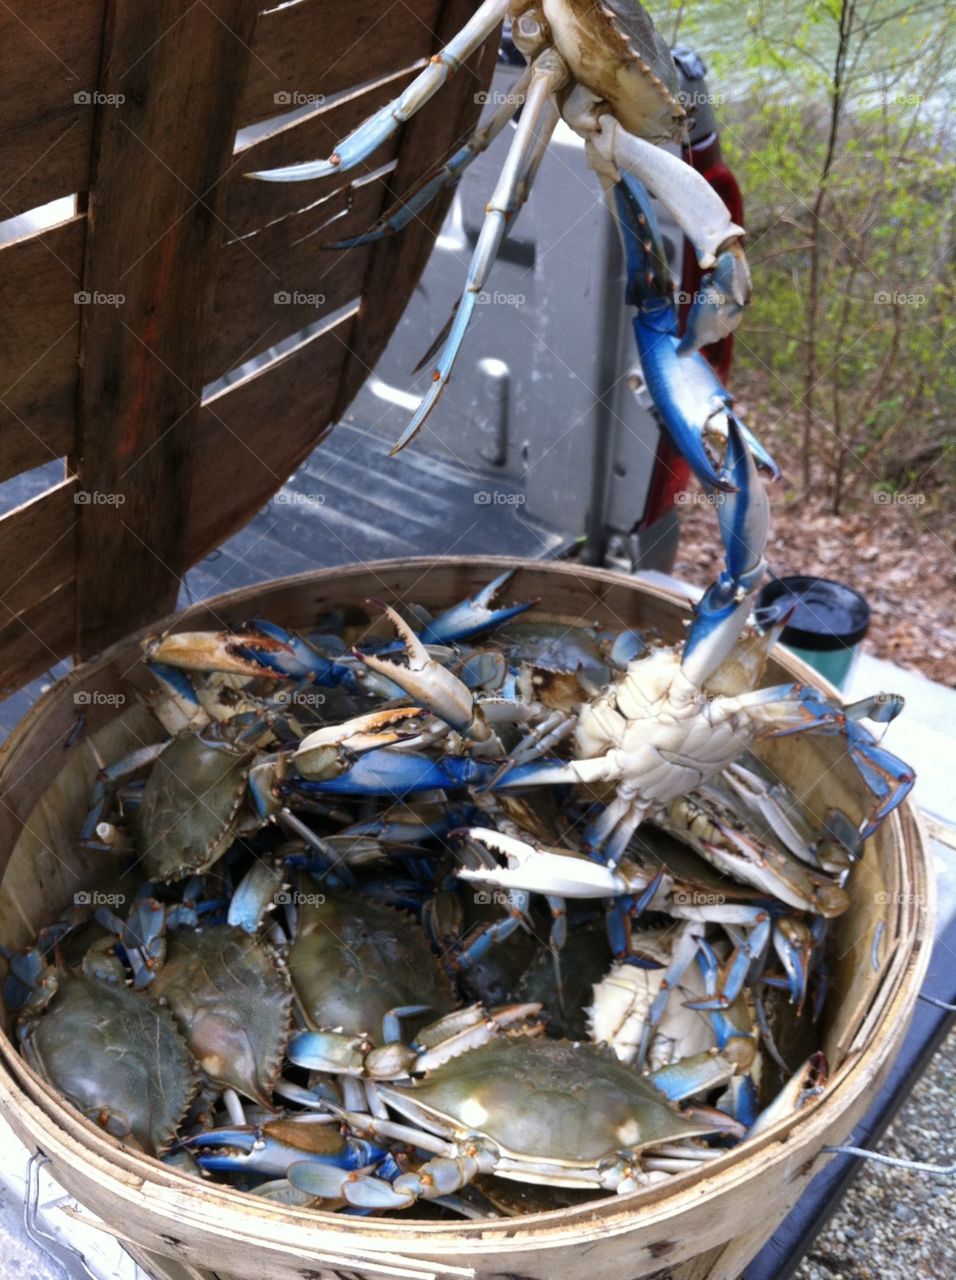 The mighty blue crab of the Chesapeake Bay! 